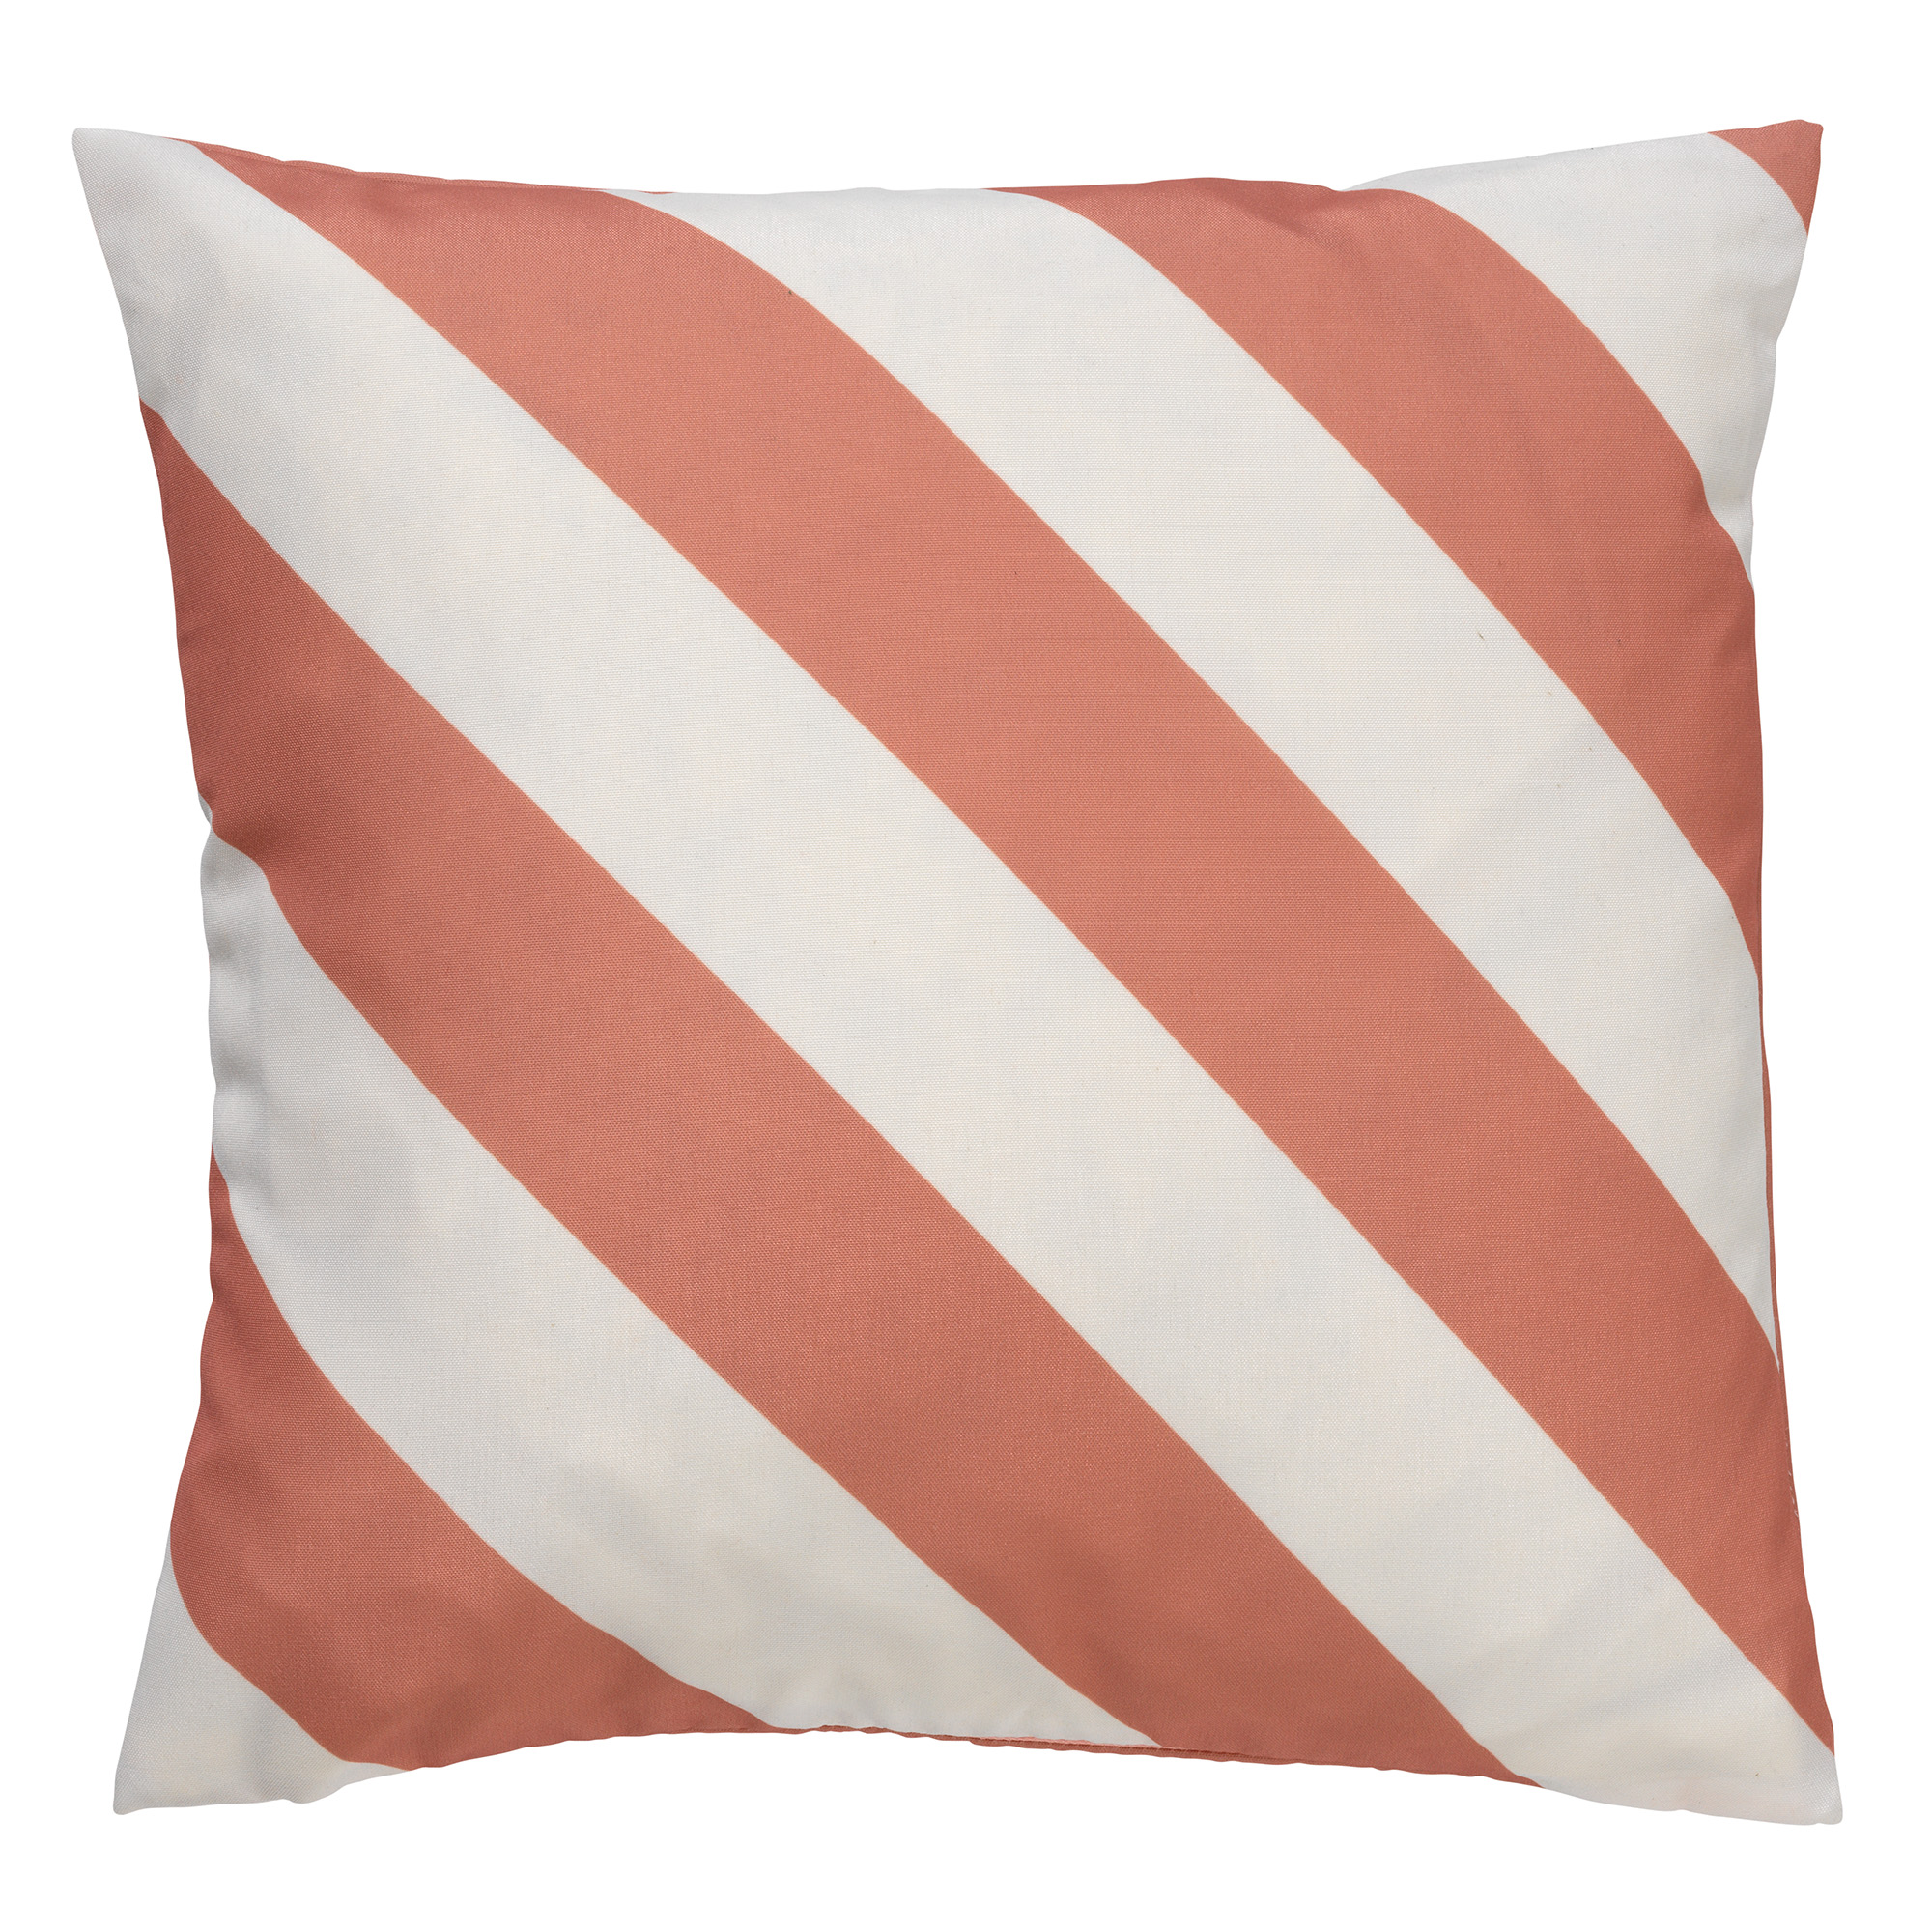 Cushion Sanzeno 45x45 cm  muted clay - water-repellent and UV-resistant -striped - white and  rose